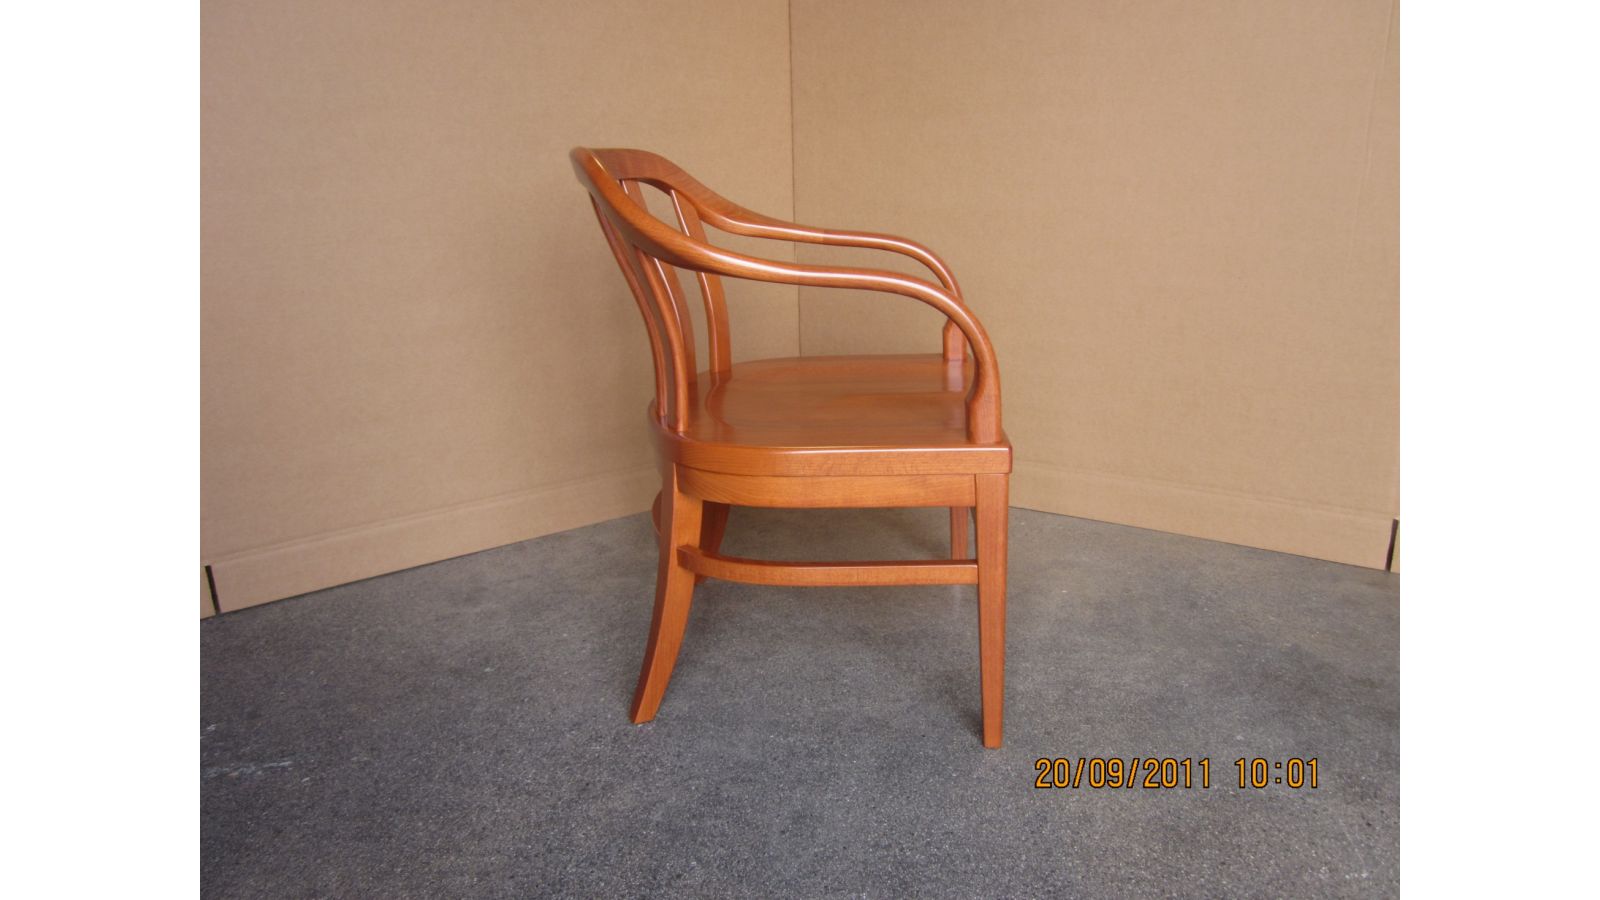 Courthouse Chair